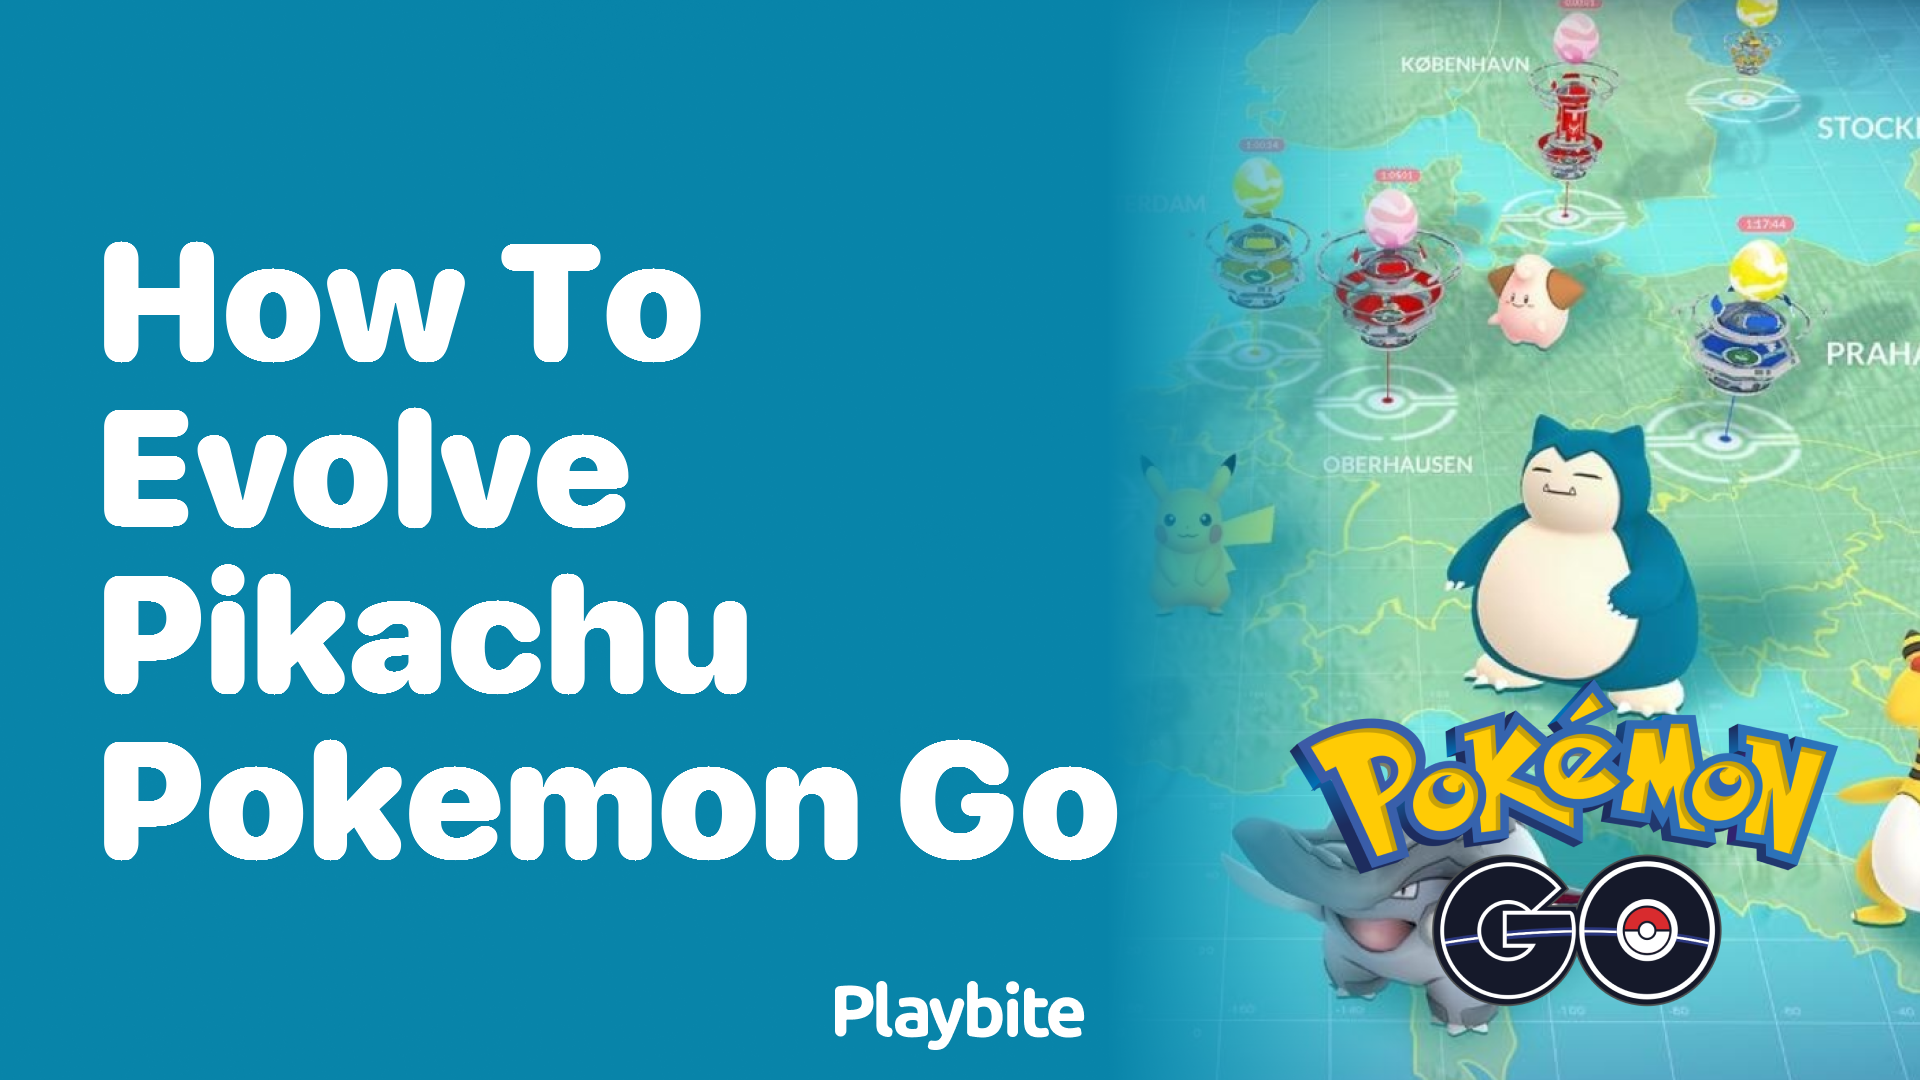 How to Evolve Pikachu in Pokemon Go: A Simple Guide